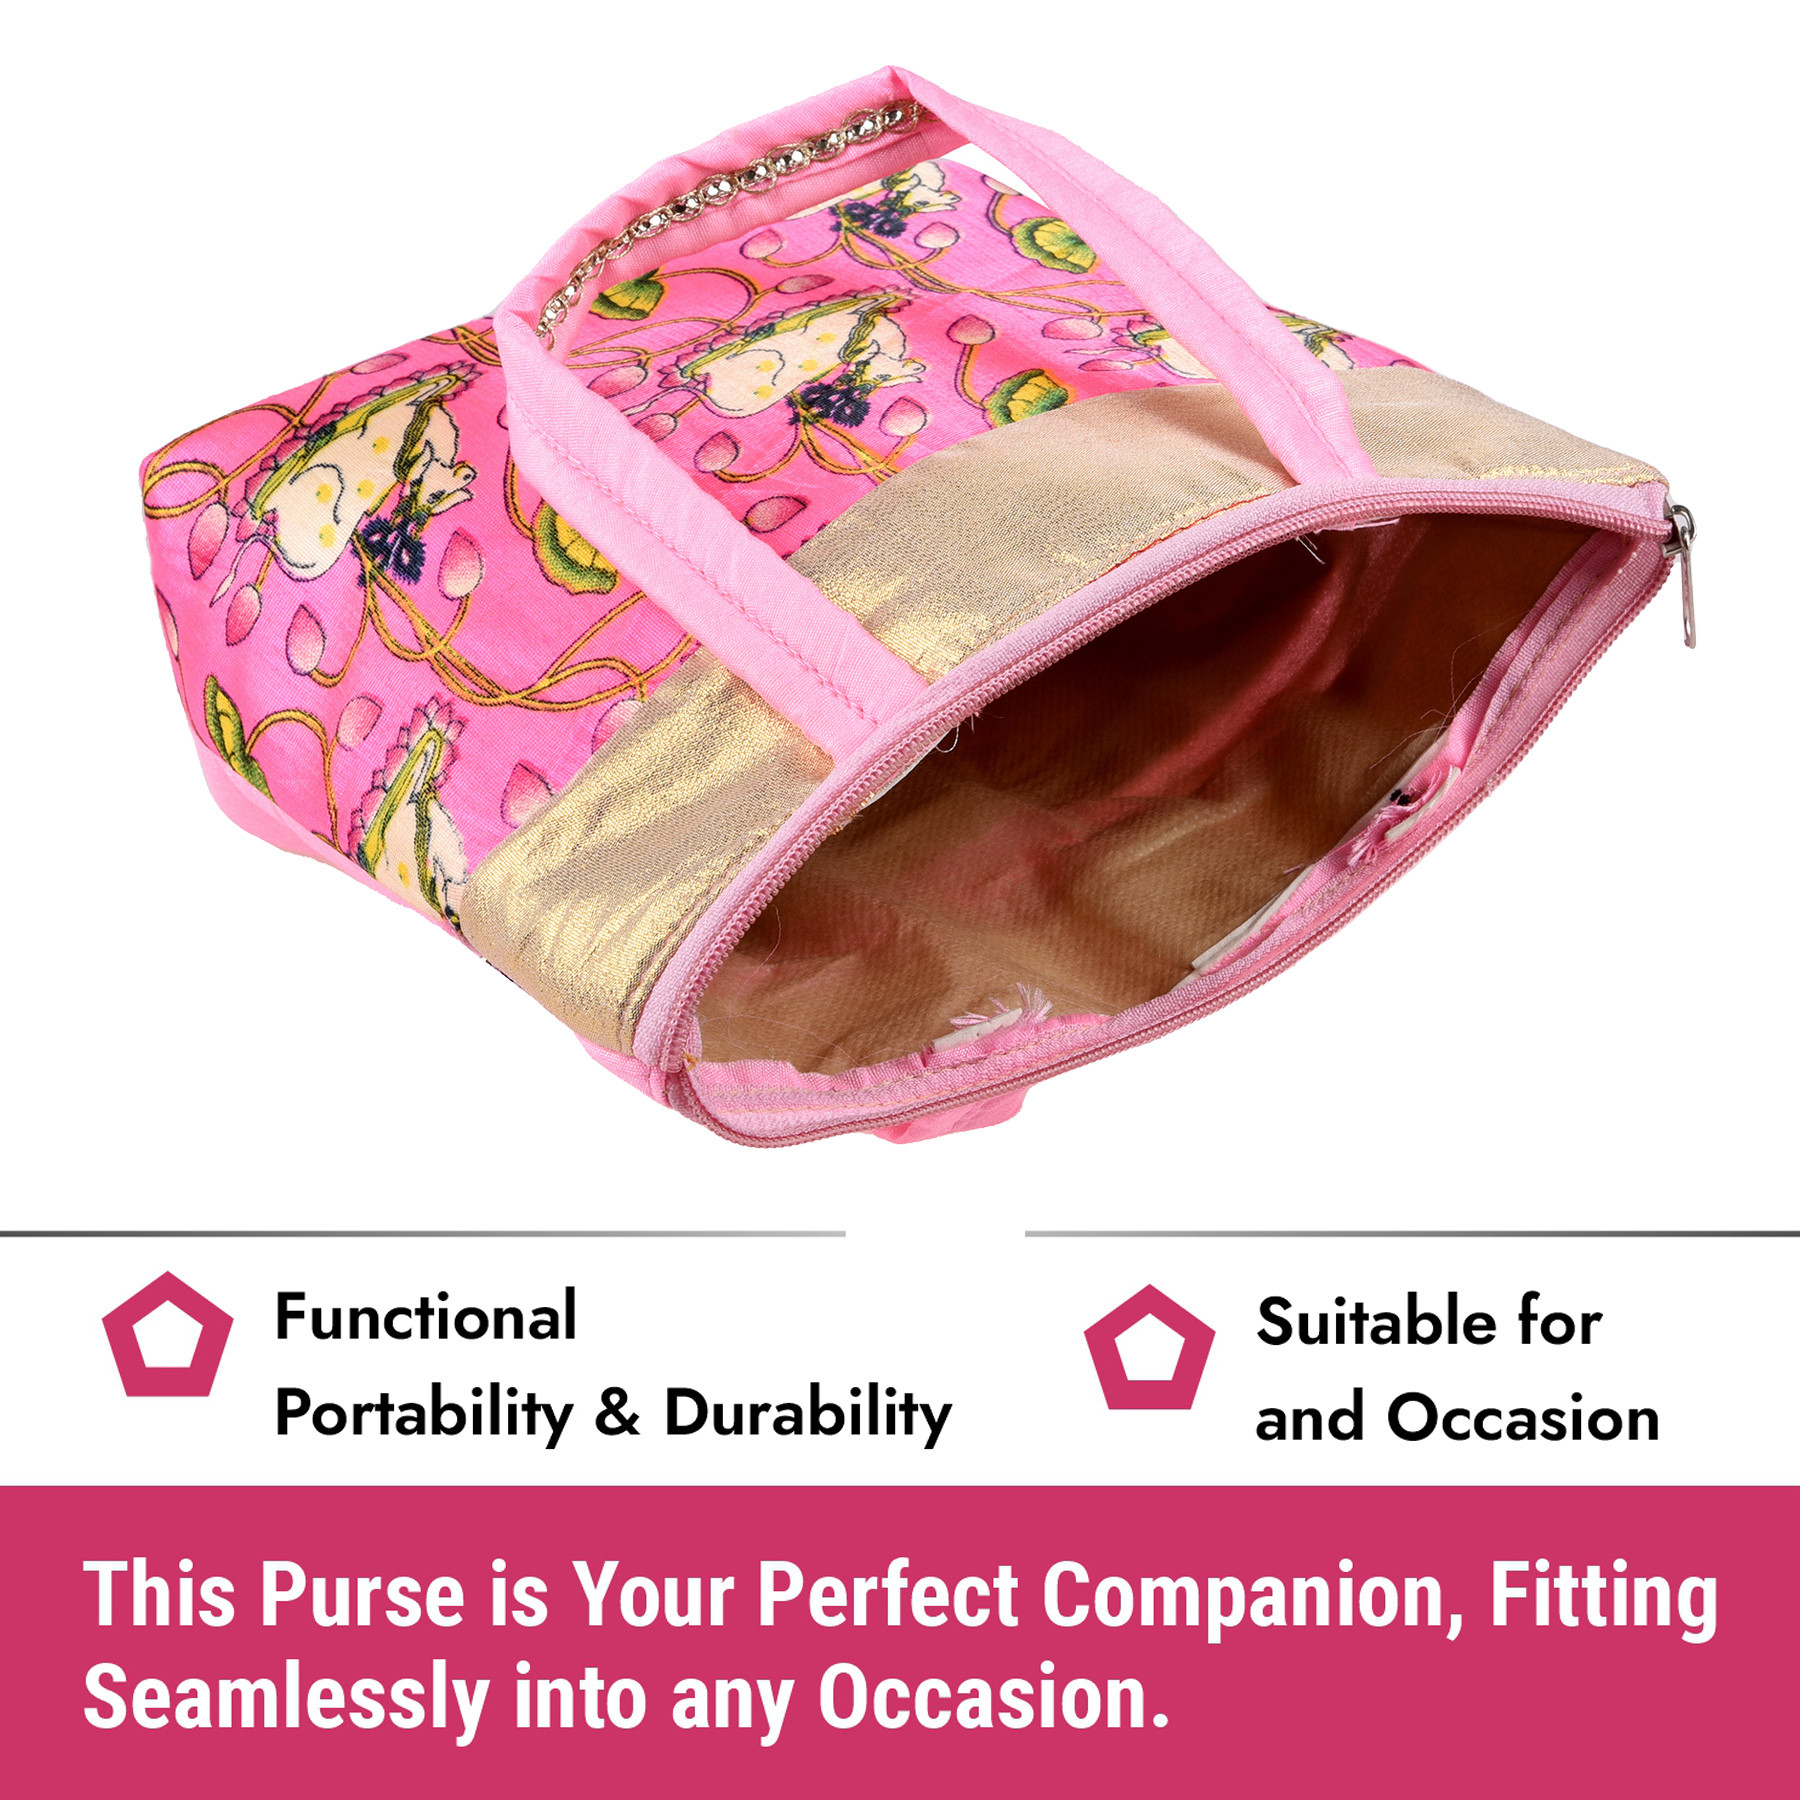 Kuber Industries Hand Purse | Traditional Mini Hand Bag | Silk Wallet Hand Bag | Shagun Hand Purse | Woman Tote Hand Bag | Gifts Hand Bag | Cow-Small Hand Purse | Pack of 2 | Multi